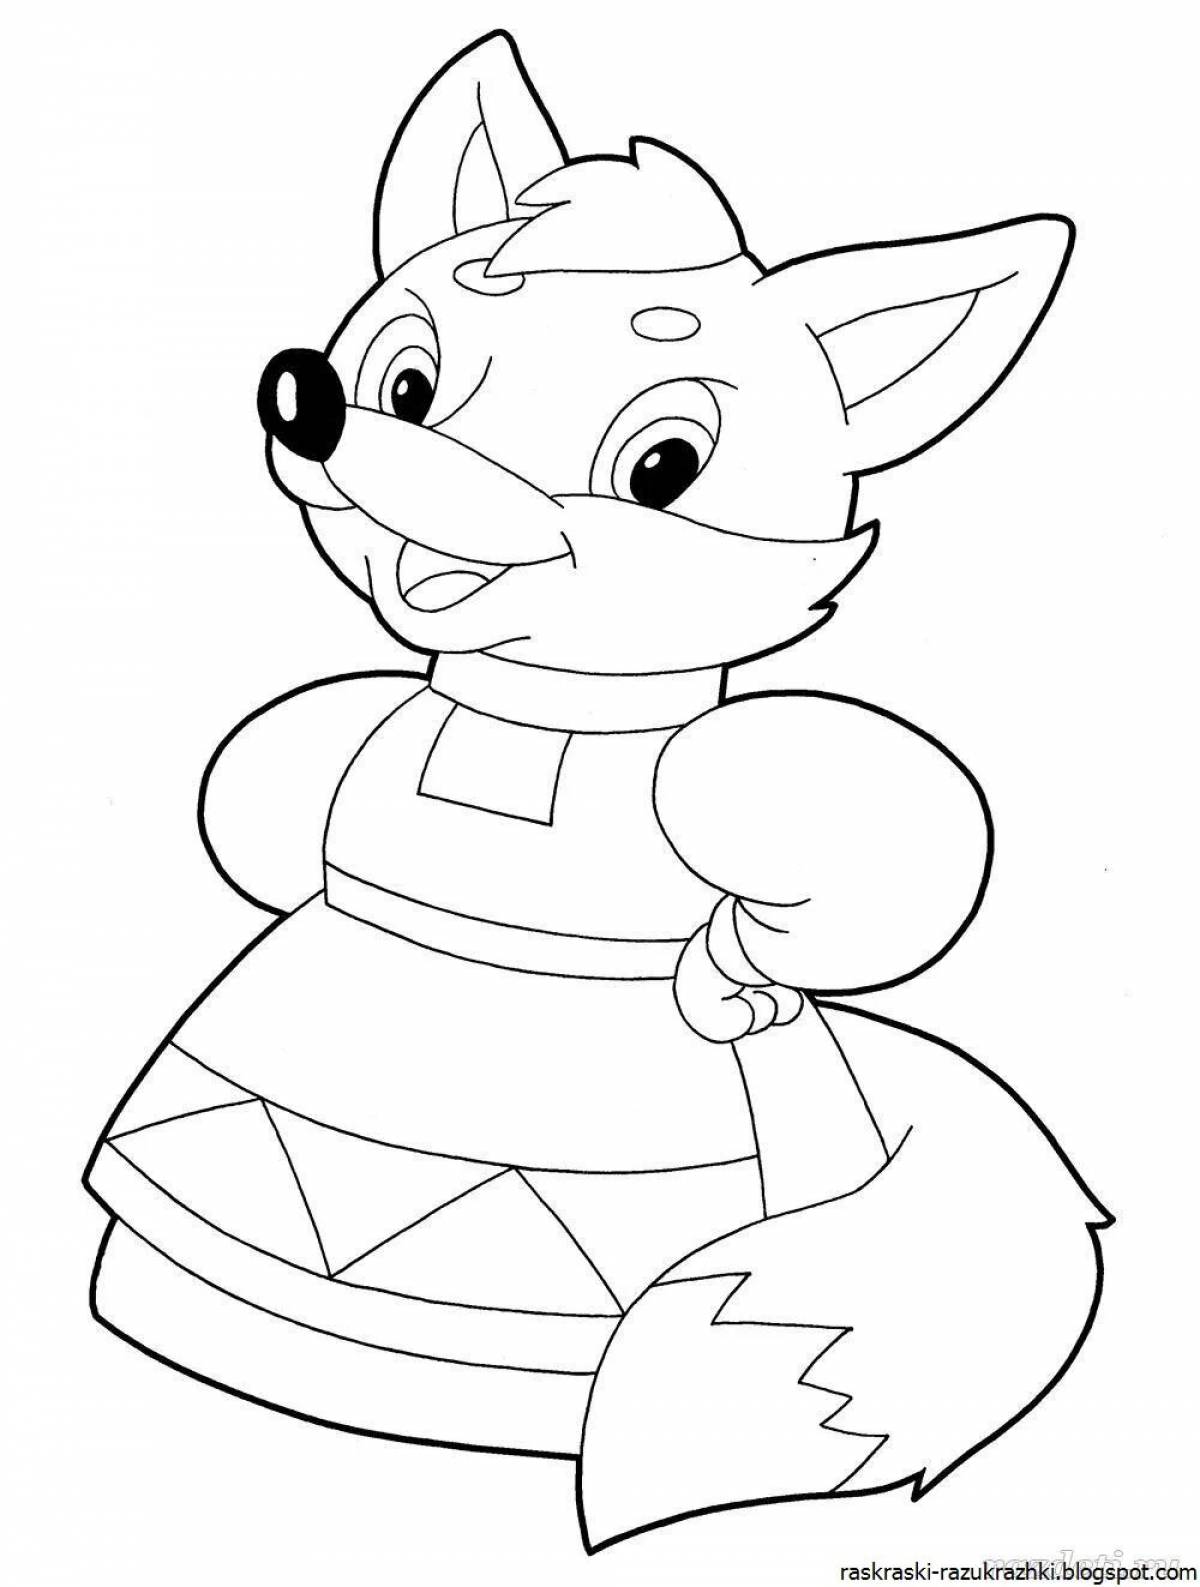 Coloring fox for children 3-4 years old